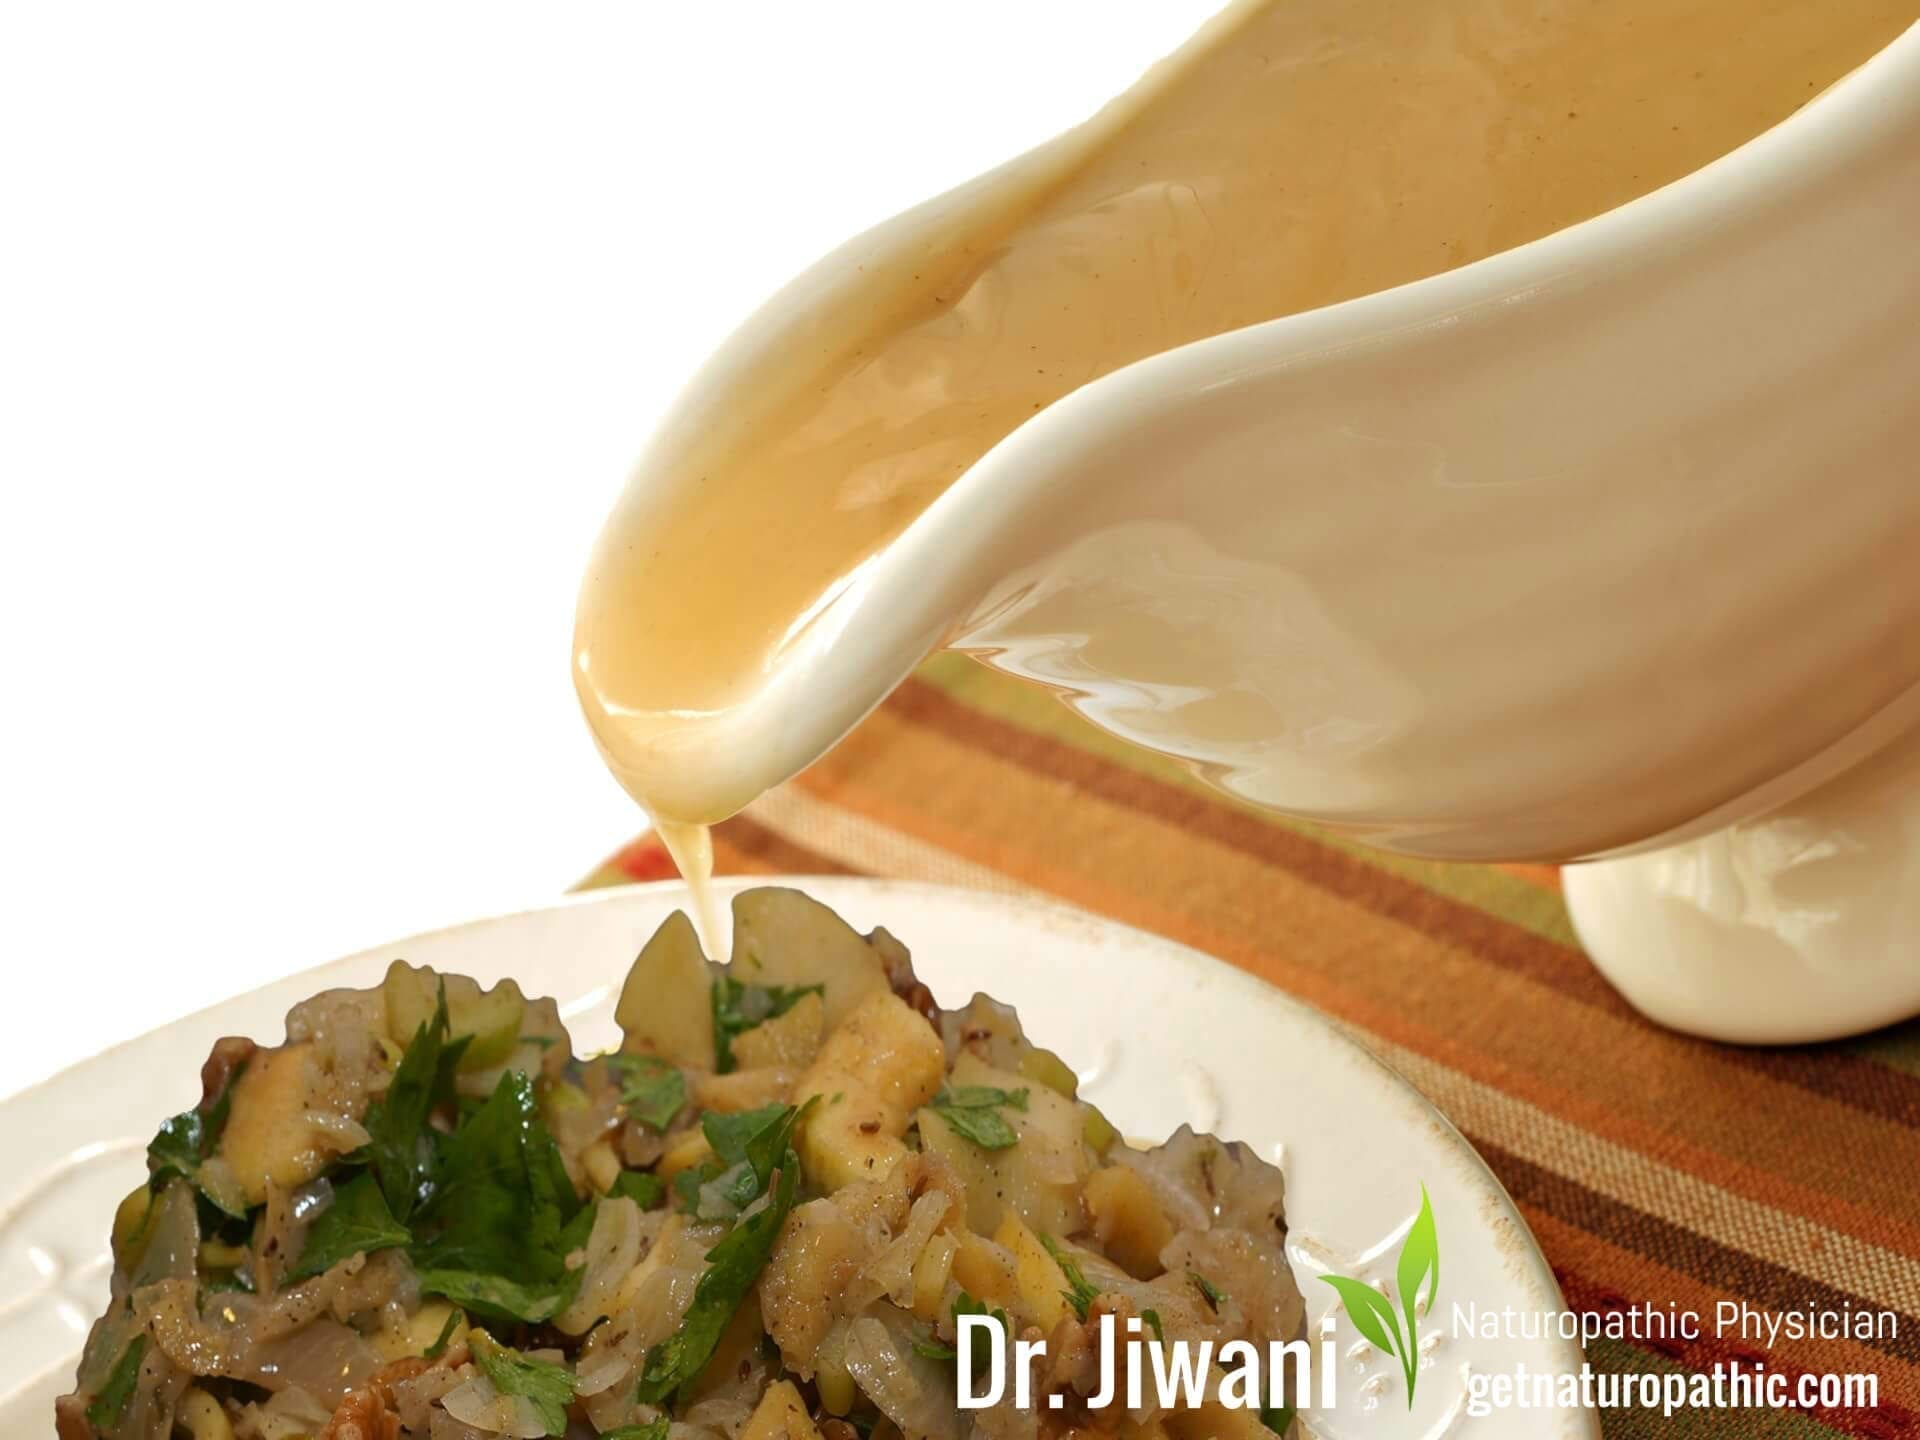 Dr. Jiwani's Coconut Gravy: Low Carb, Gluten-Free, Egg-Free, Dairy-Free, Soy-Free, Corn-Free, Ideal For Vegan, Paleo, Keto, Diabetic & Candida Diets | Dr. Jiwani's Naturopathic Nuggets Blog